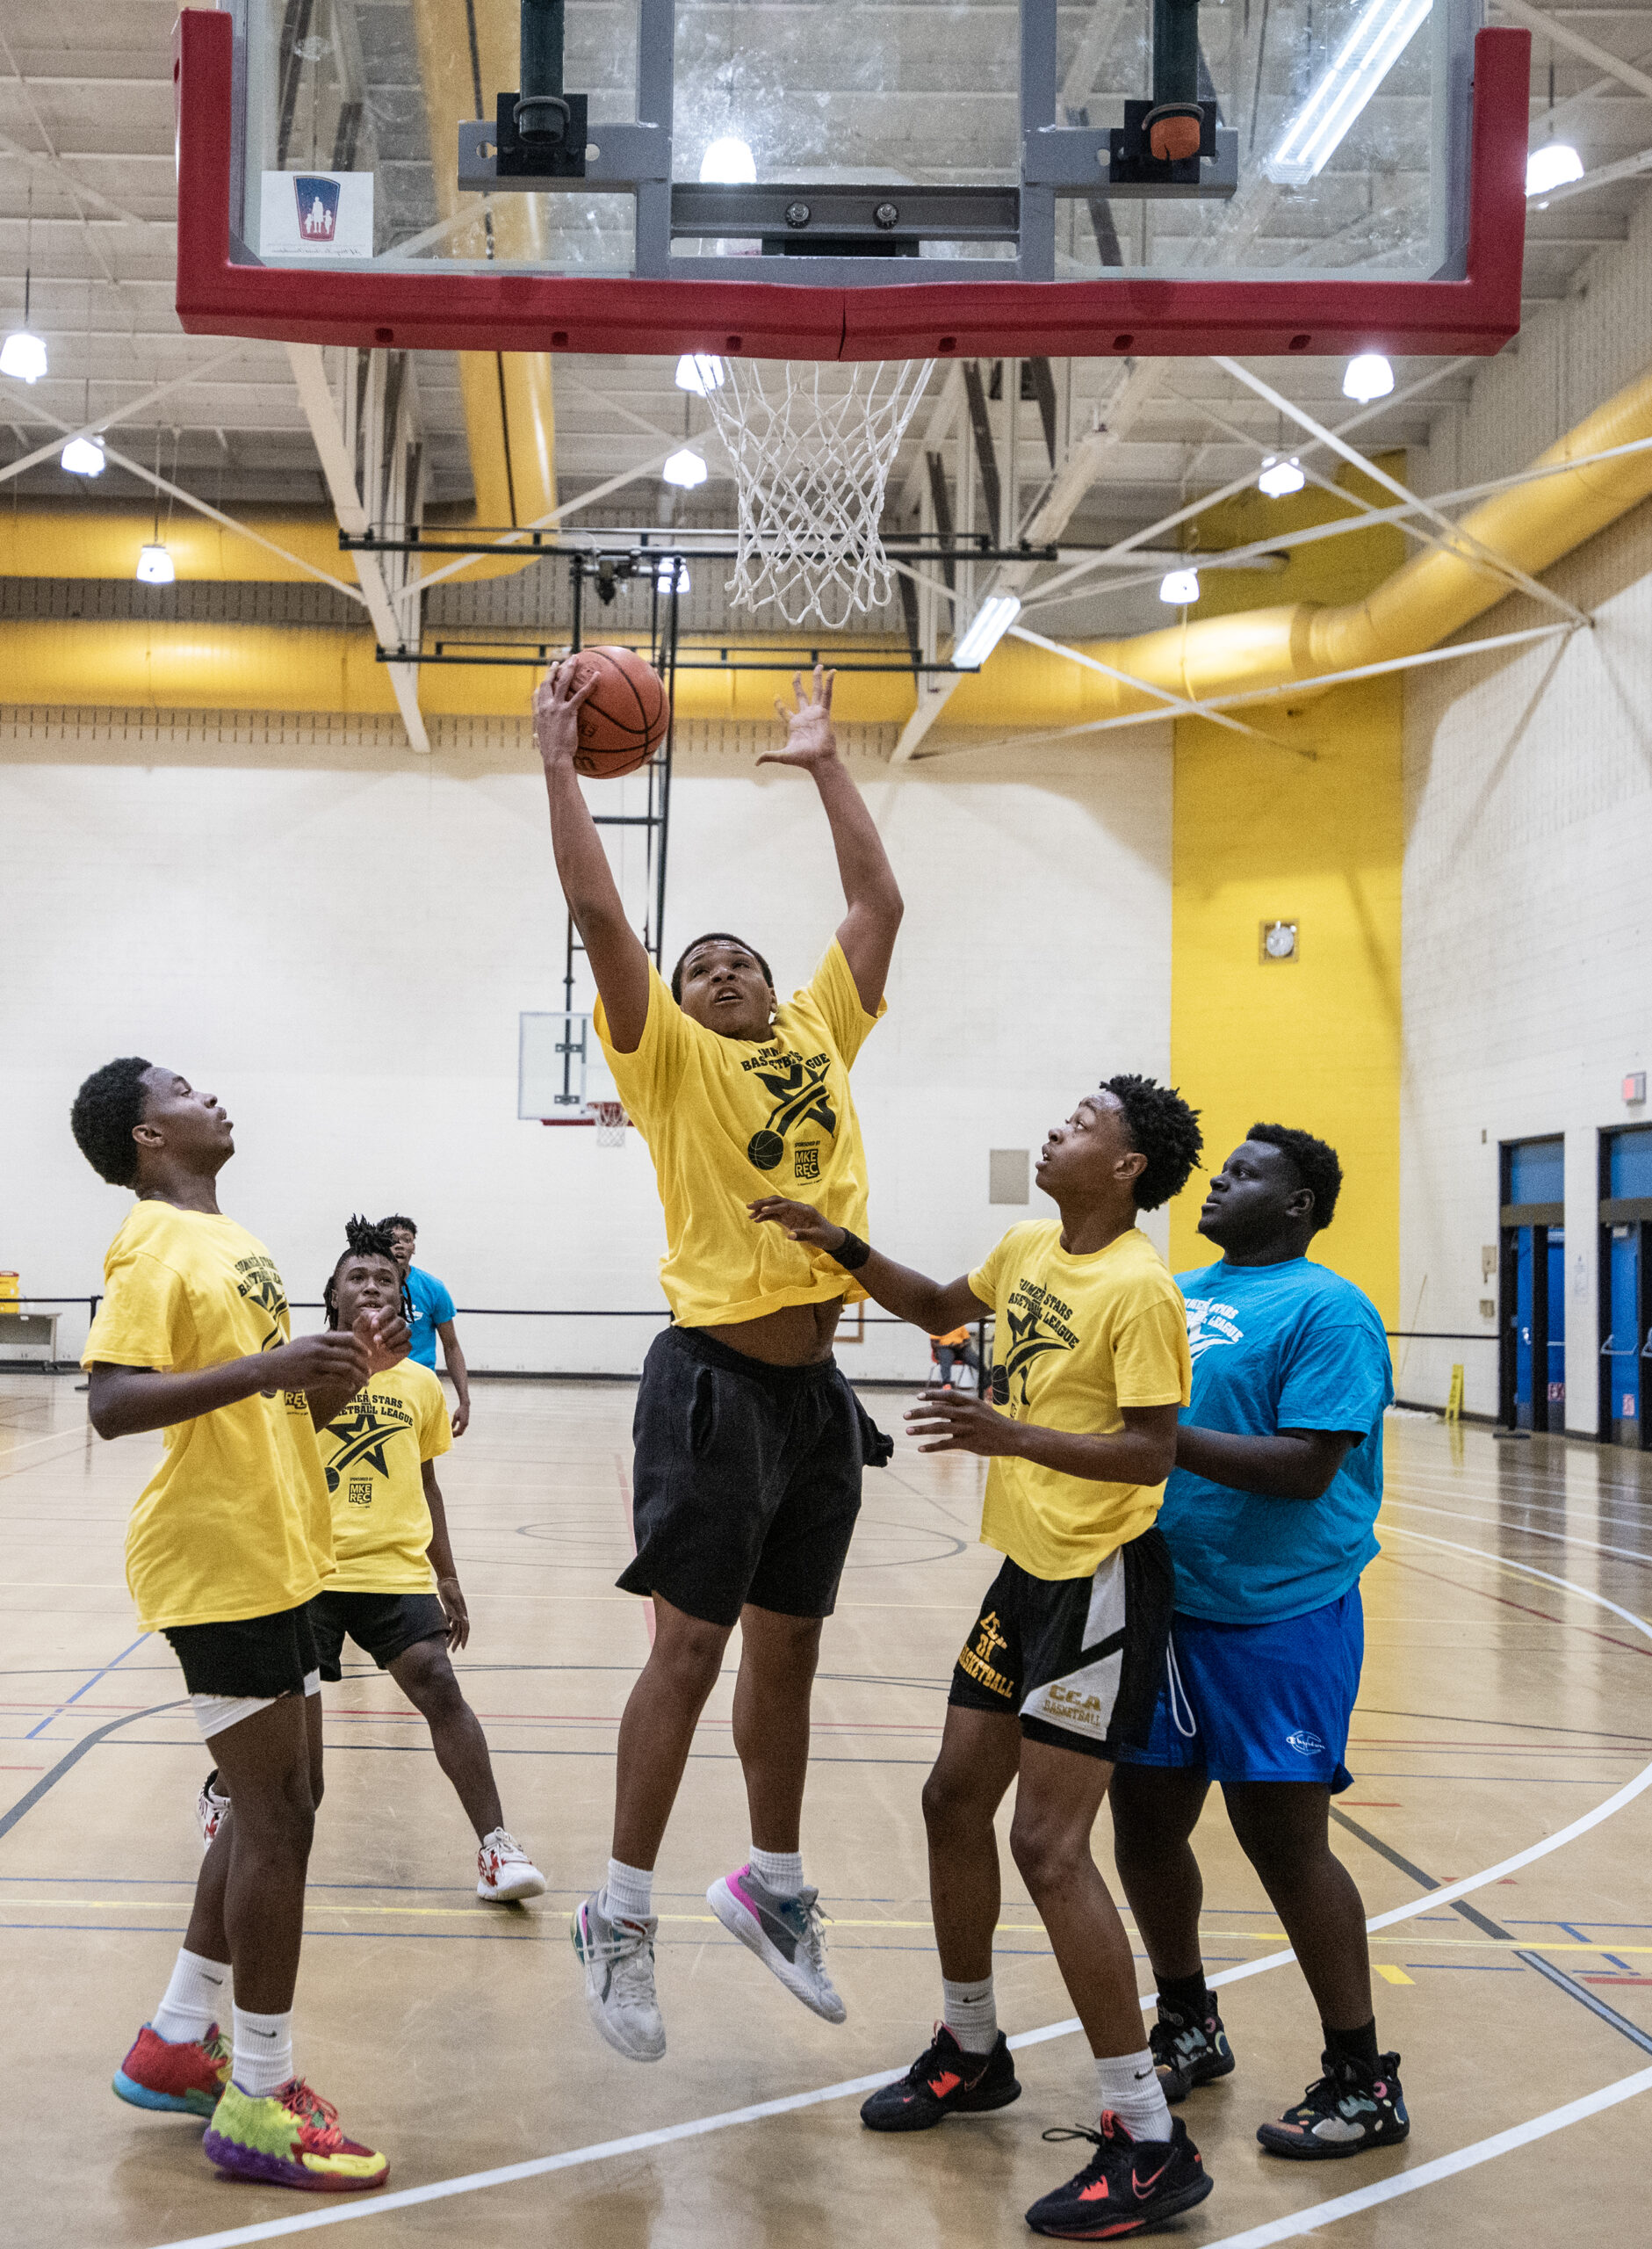 A player in a yellow shirt reaches up to make a layup.